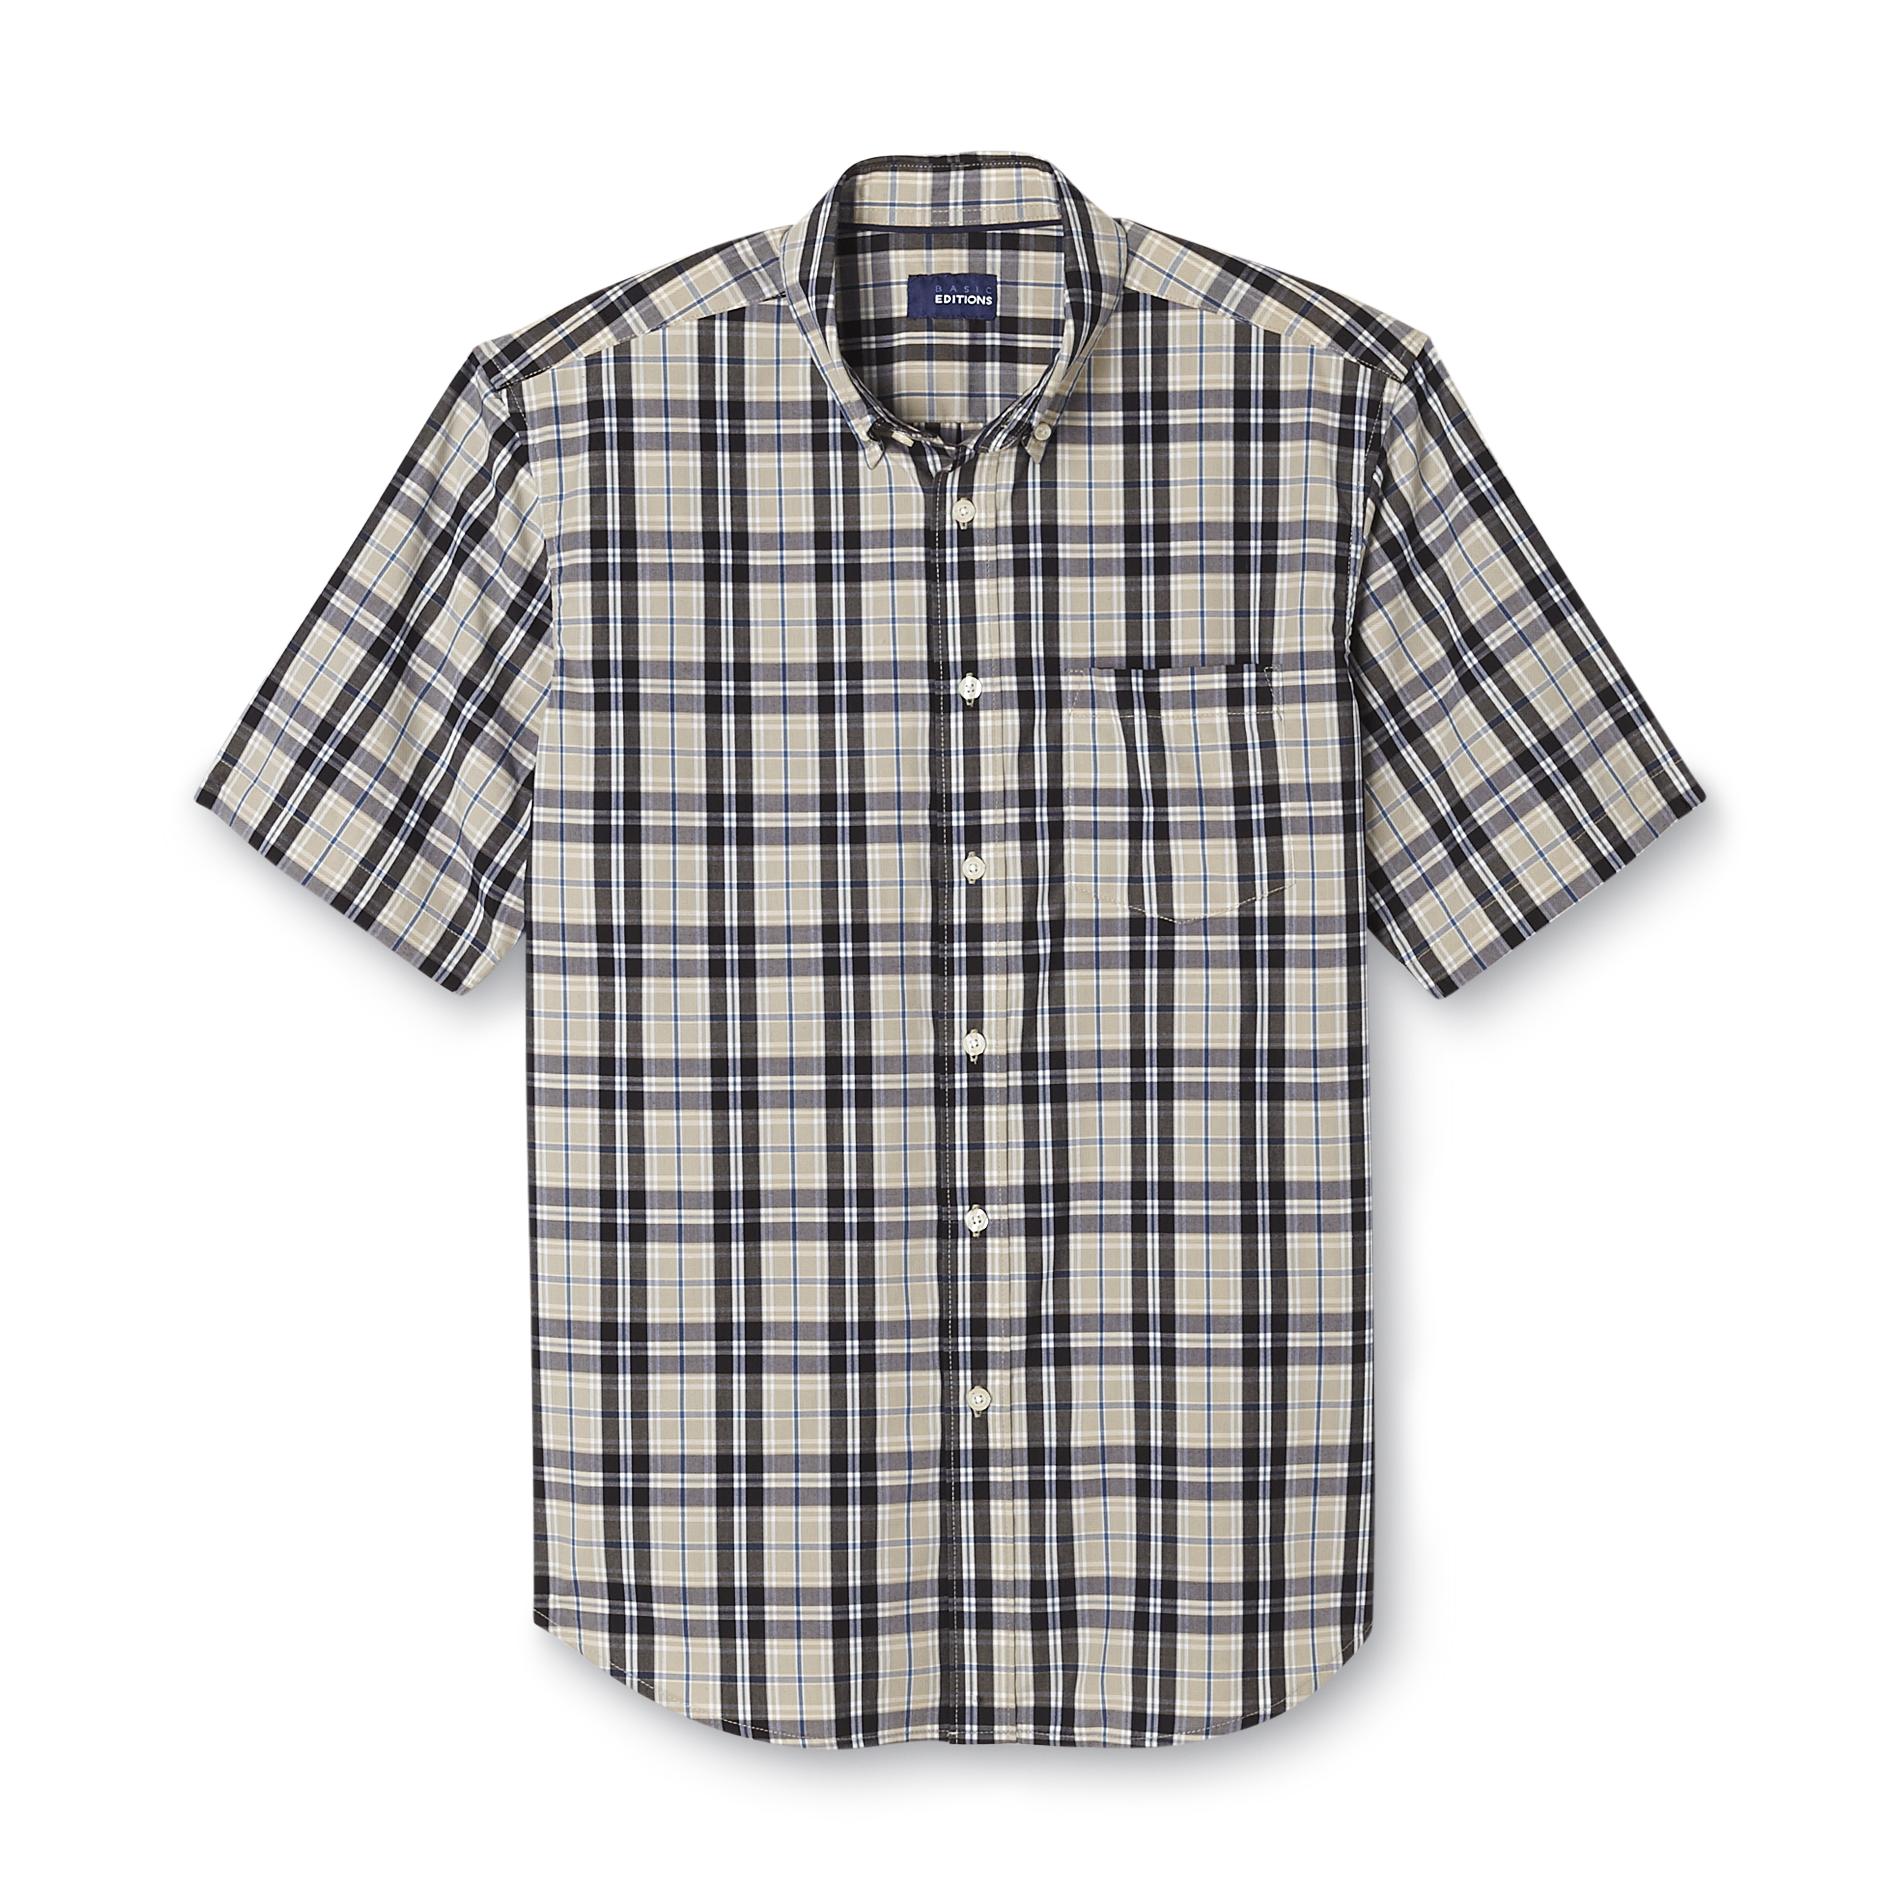 Basic Editions Men's Easy Care Woven Shirt - Plaid